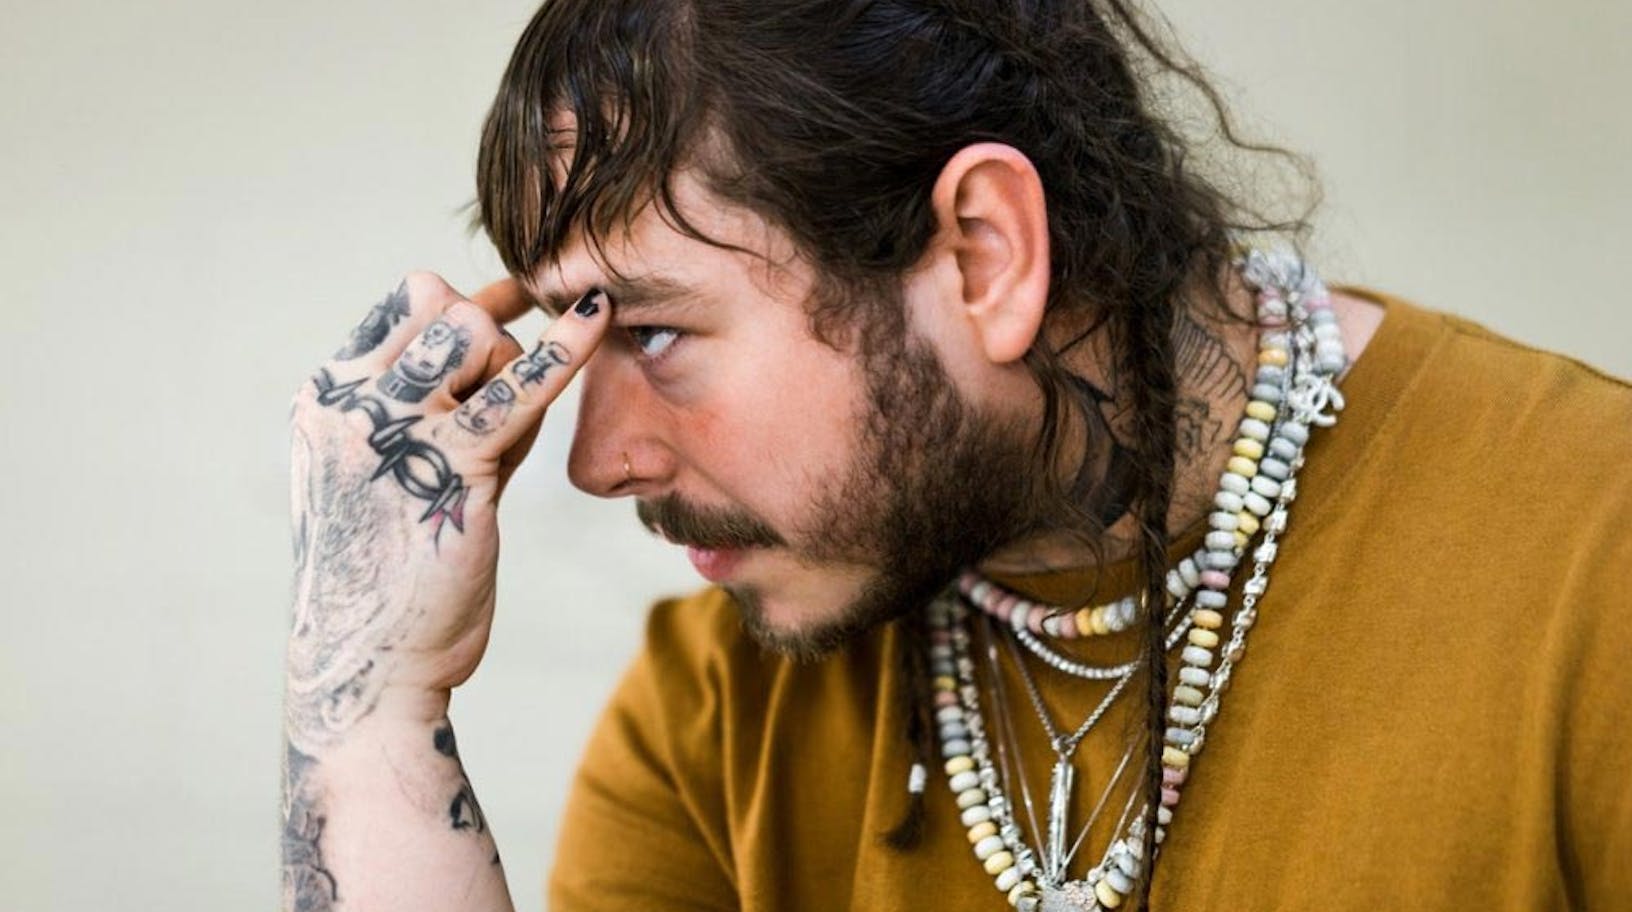 Why Post Malone's “Rockstar” is No. 1 on the Hot 100.